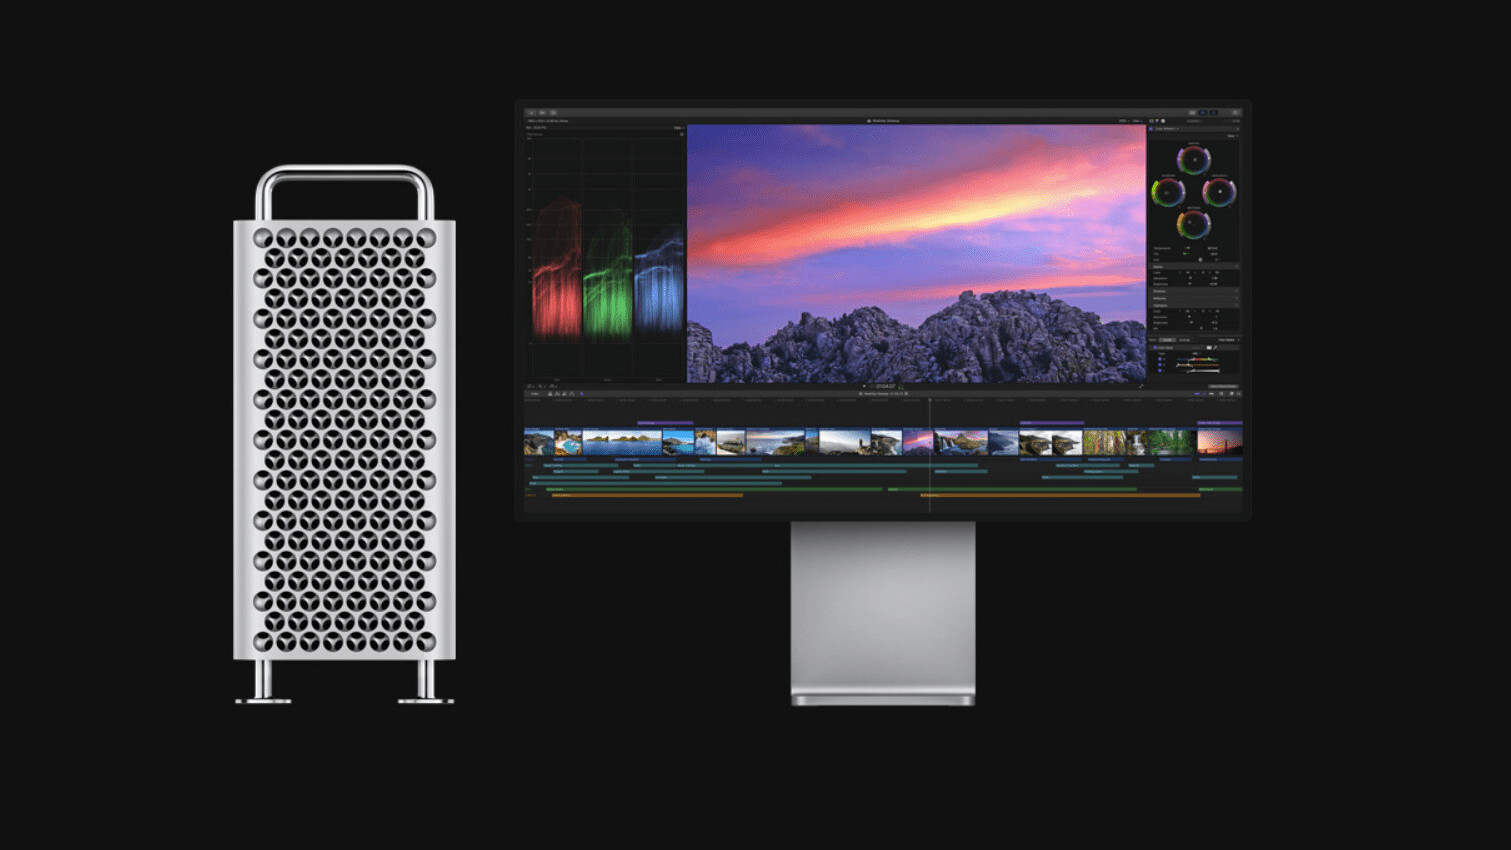 Apple now offers 90-day trials for Final Cut Pro X and Logic Pro X